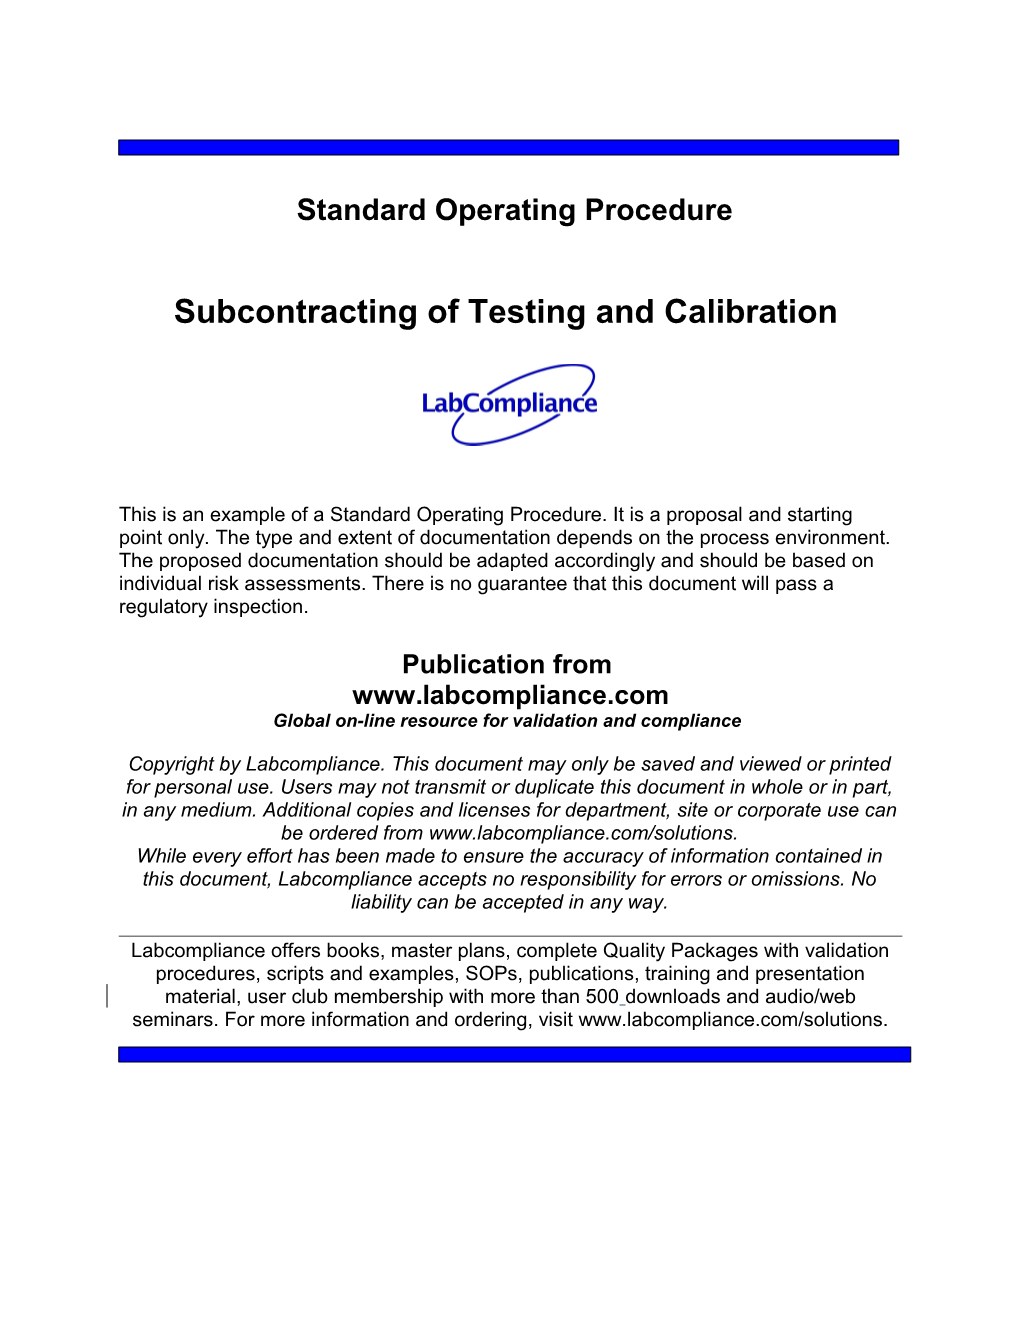 Subcontracting of Testing and Calibration